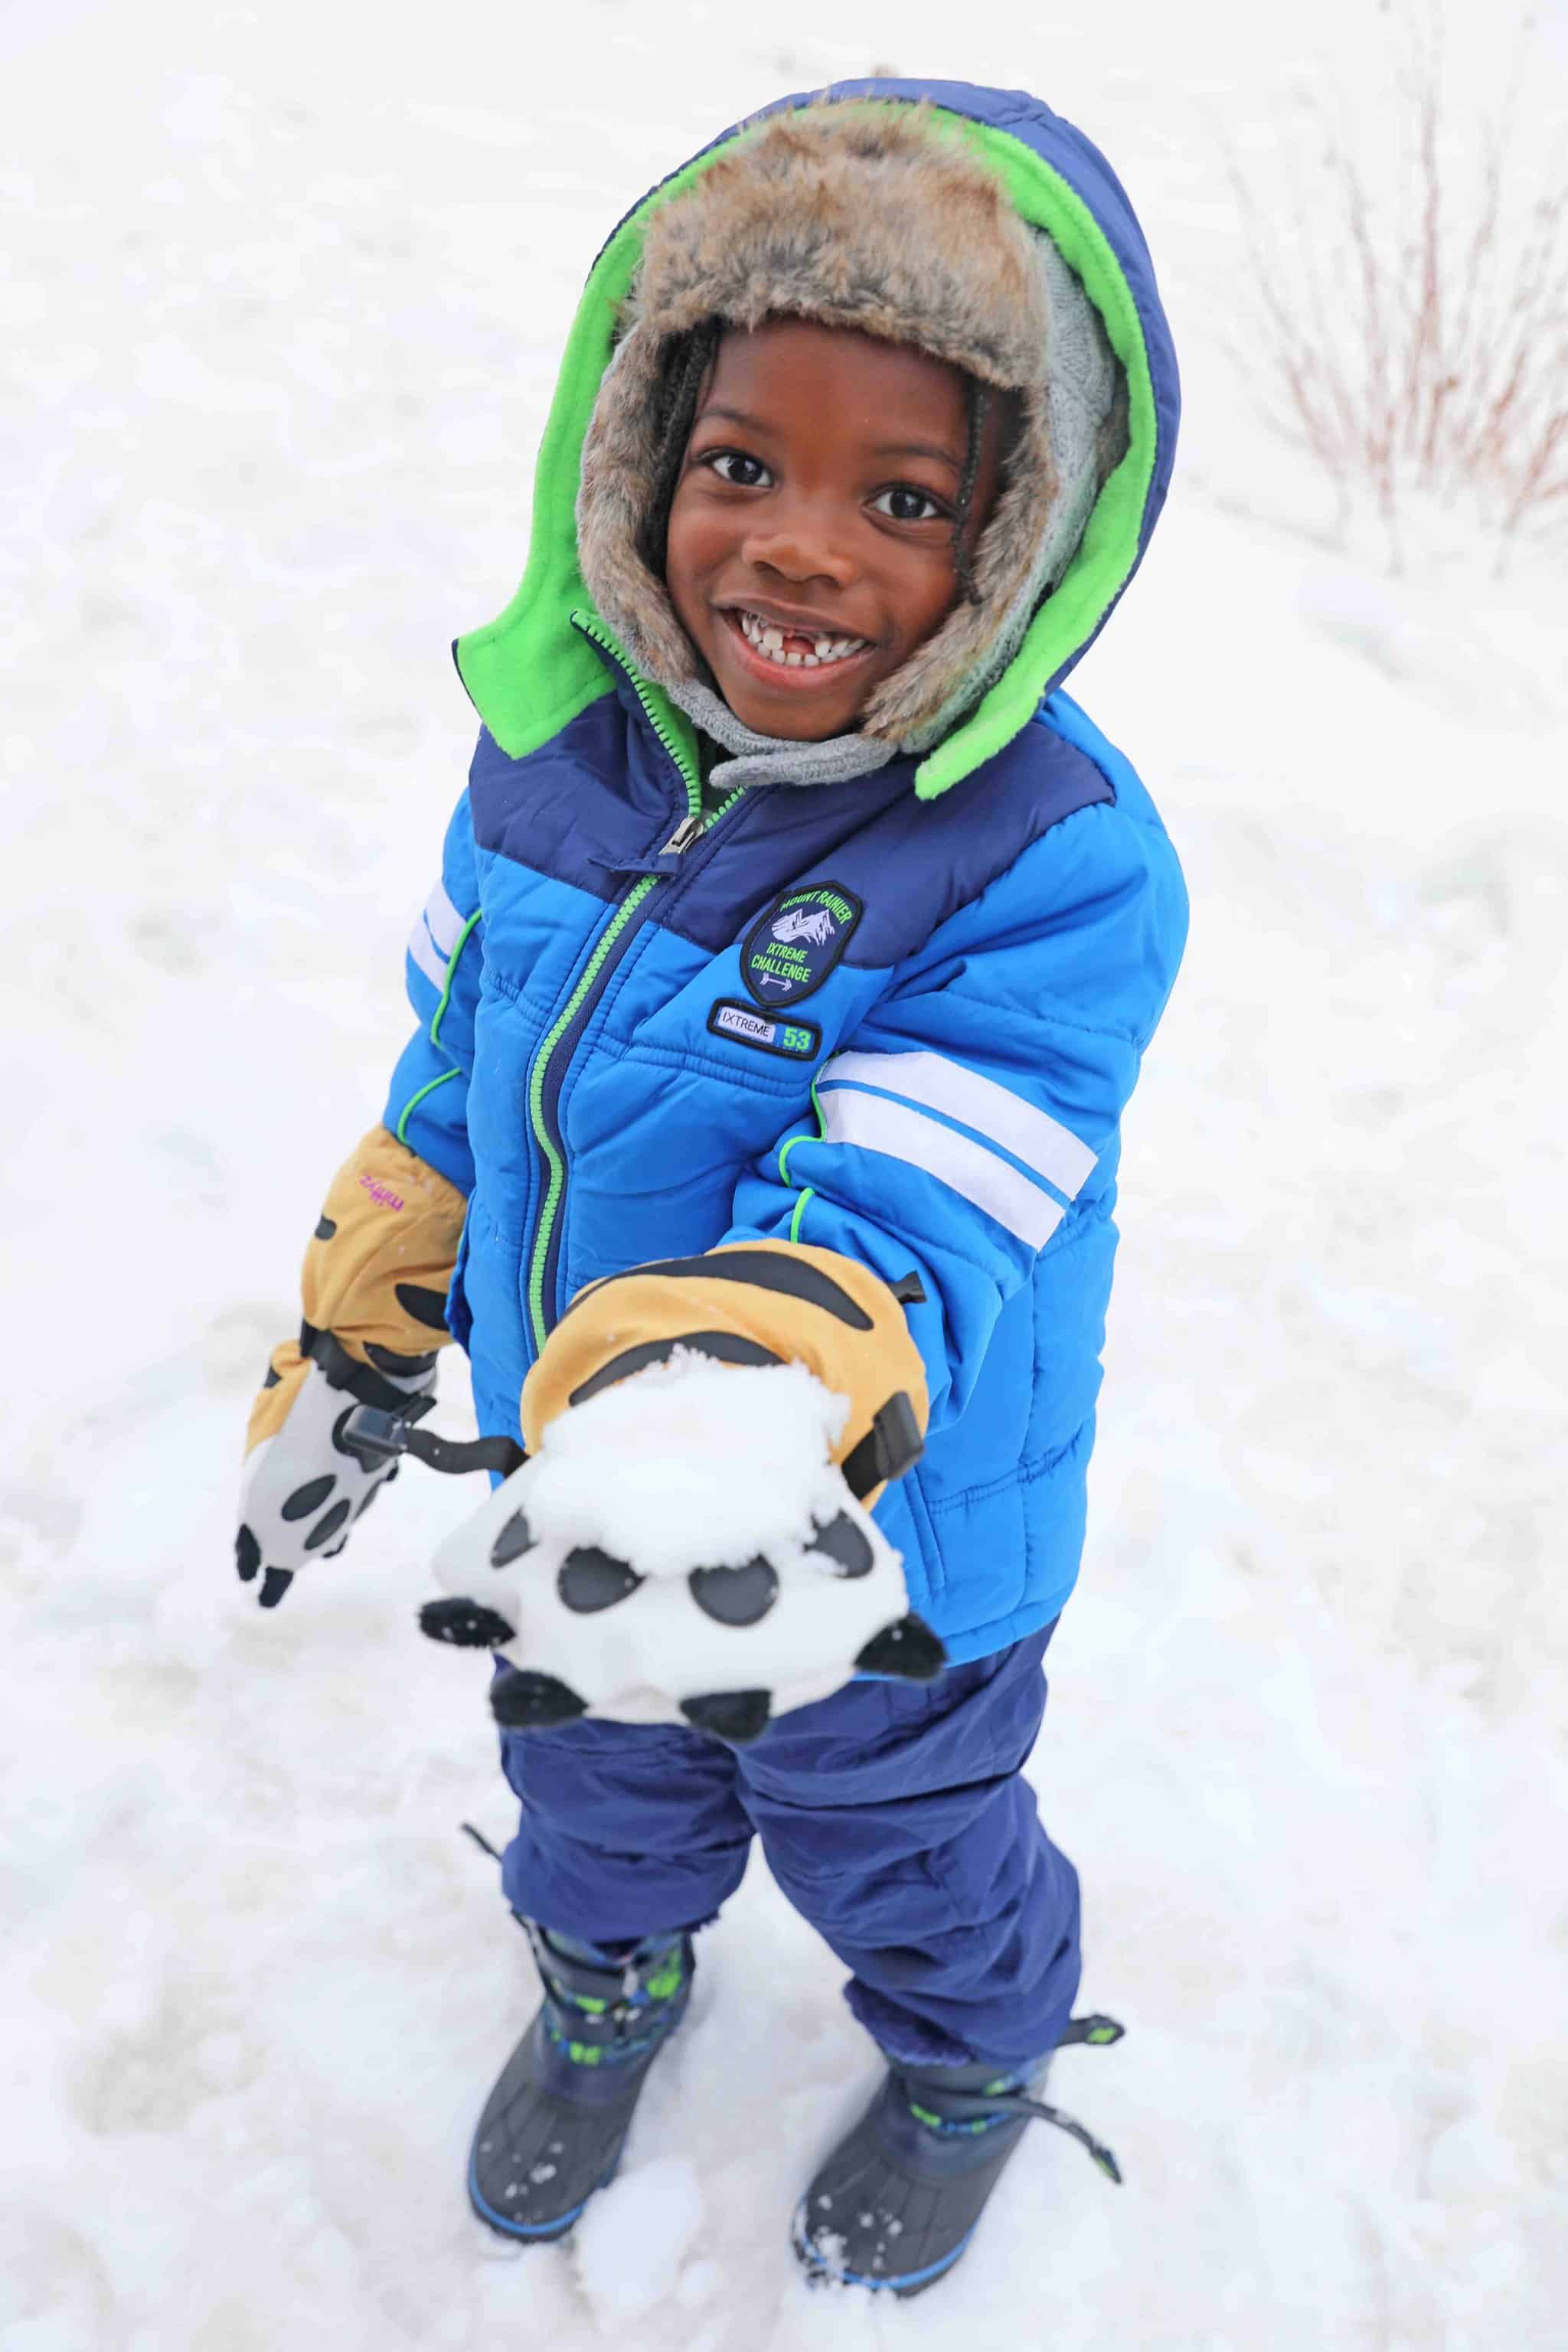 A young boy playing in the snow in his blue snowsuit